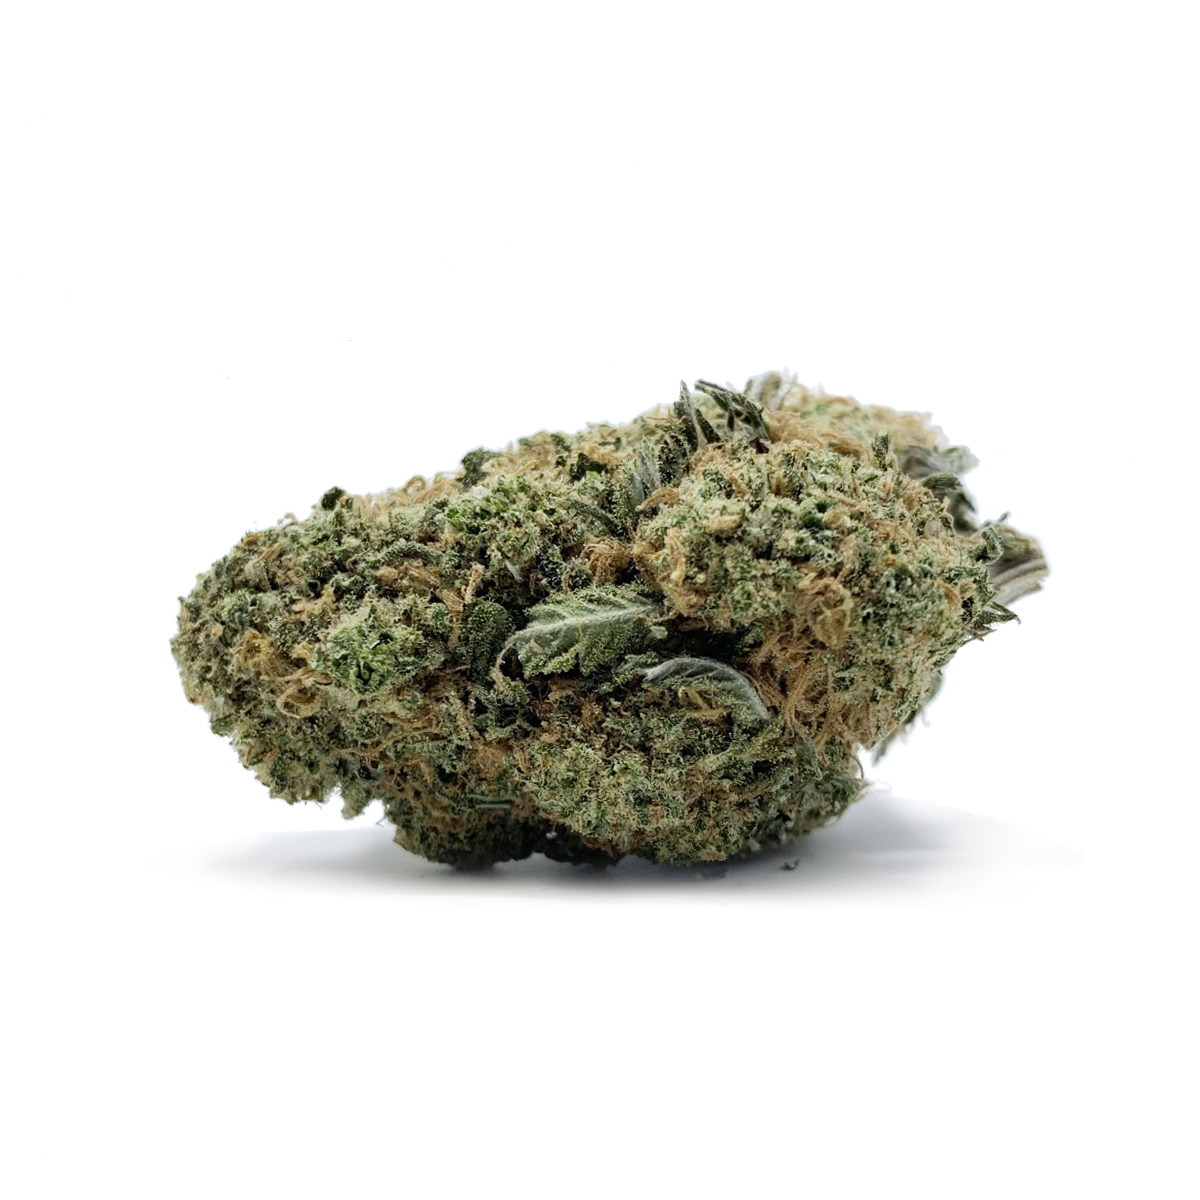 Budget Buds - Romulan | Buy Weed Online | Dispensary Near Me